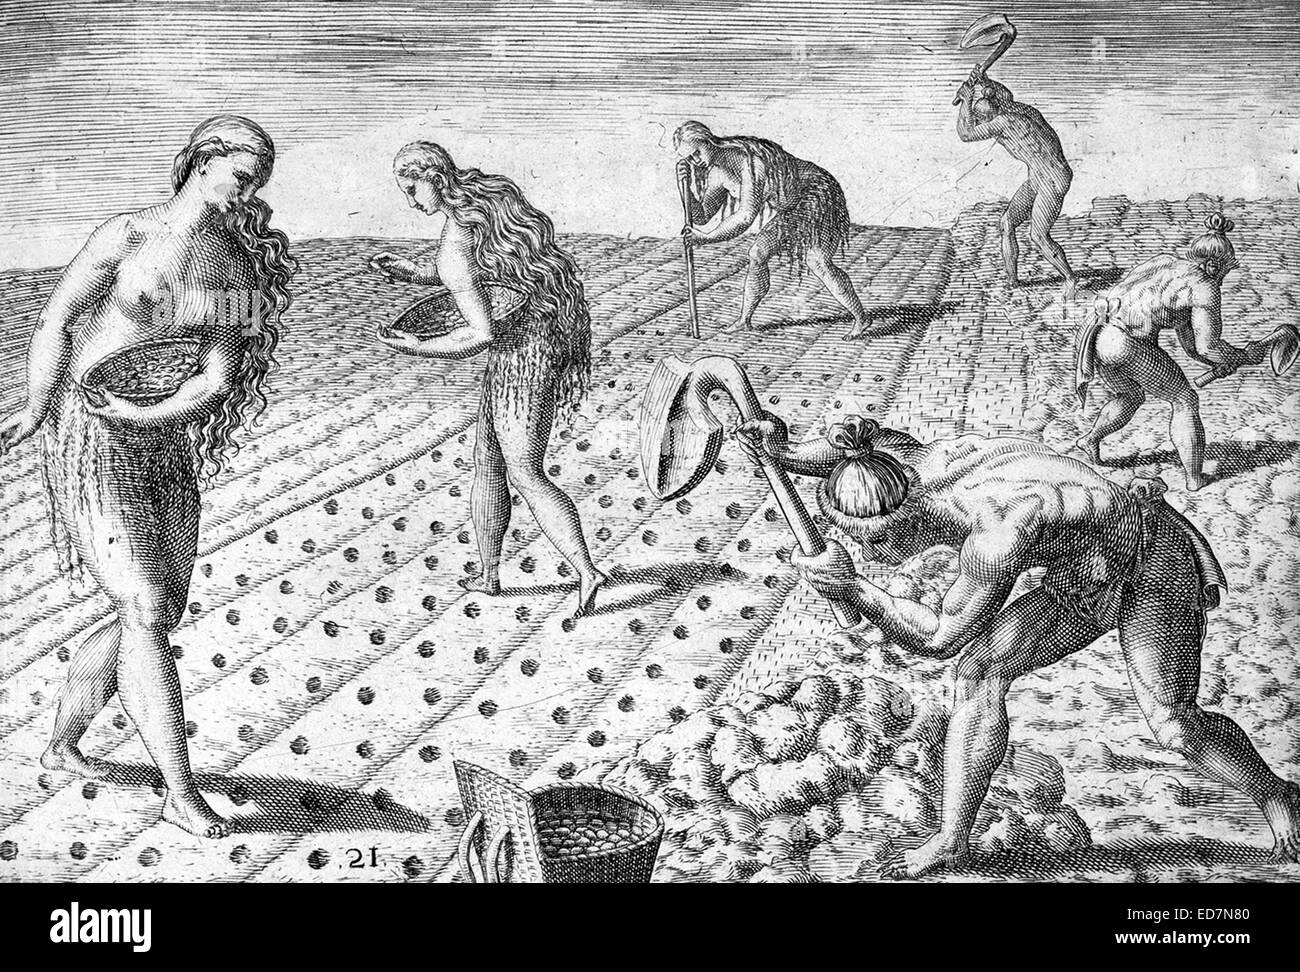 Timucua men cultivating a field and Timucua women planting corn or beans. Engraving. 1591. Stock Photo